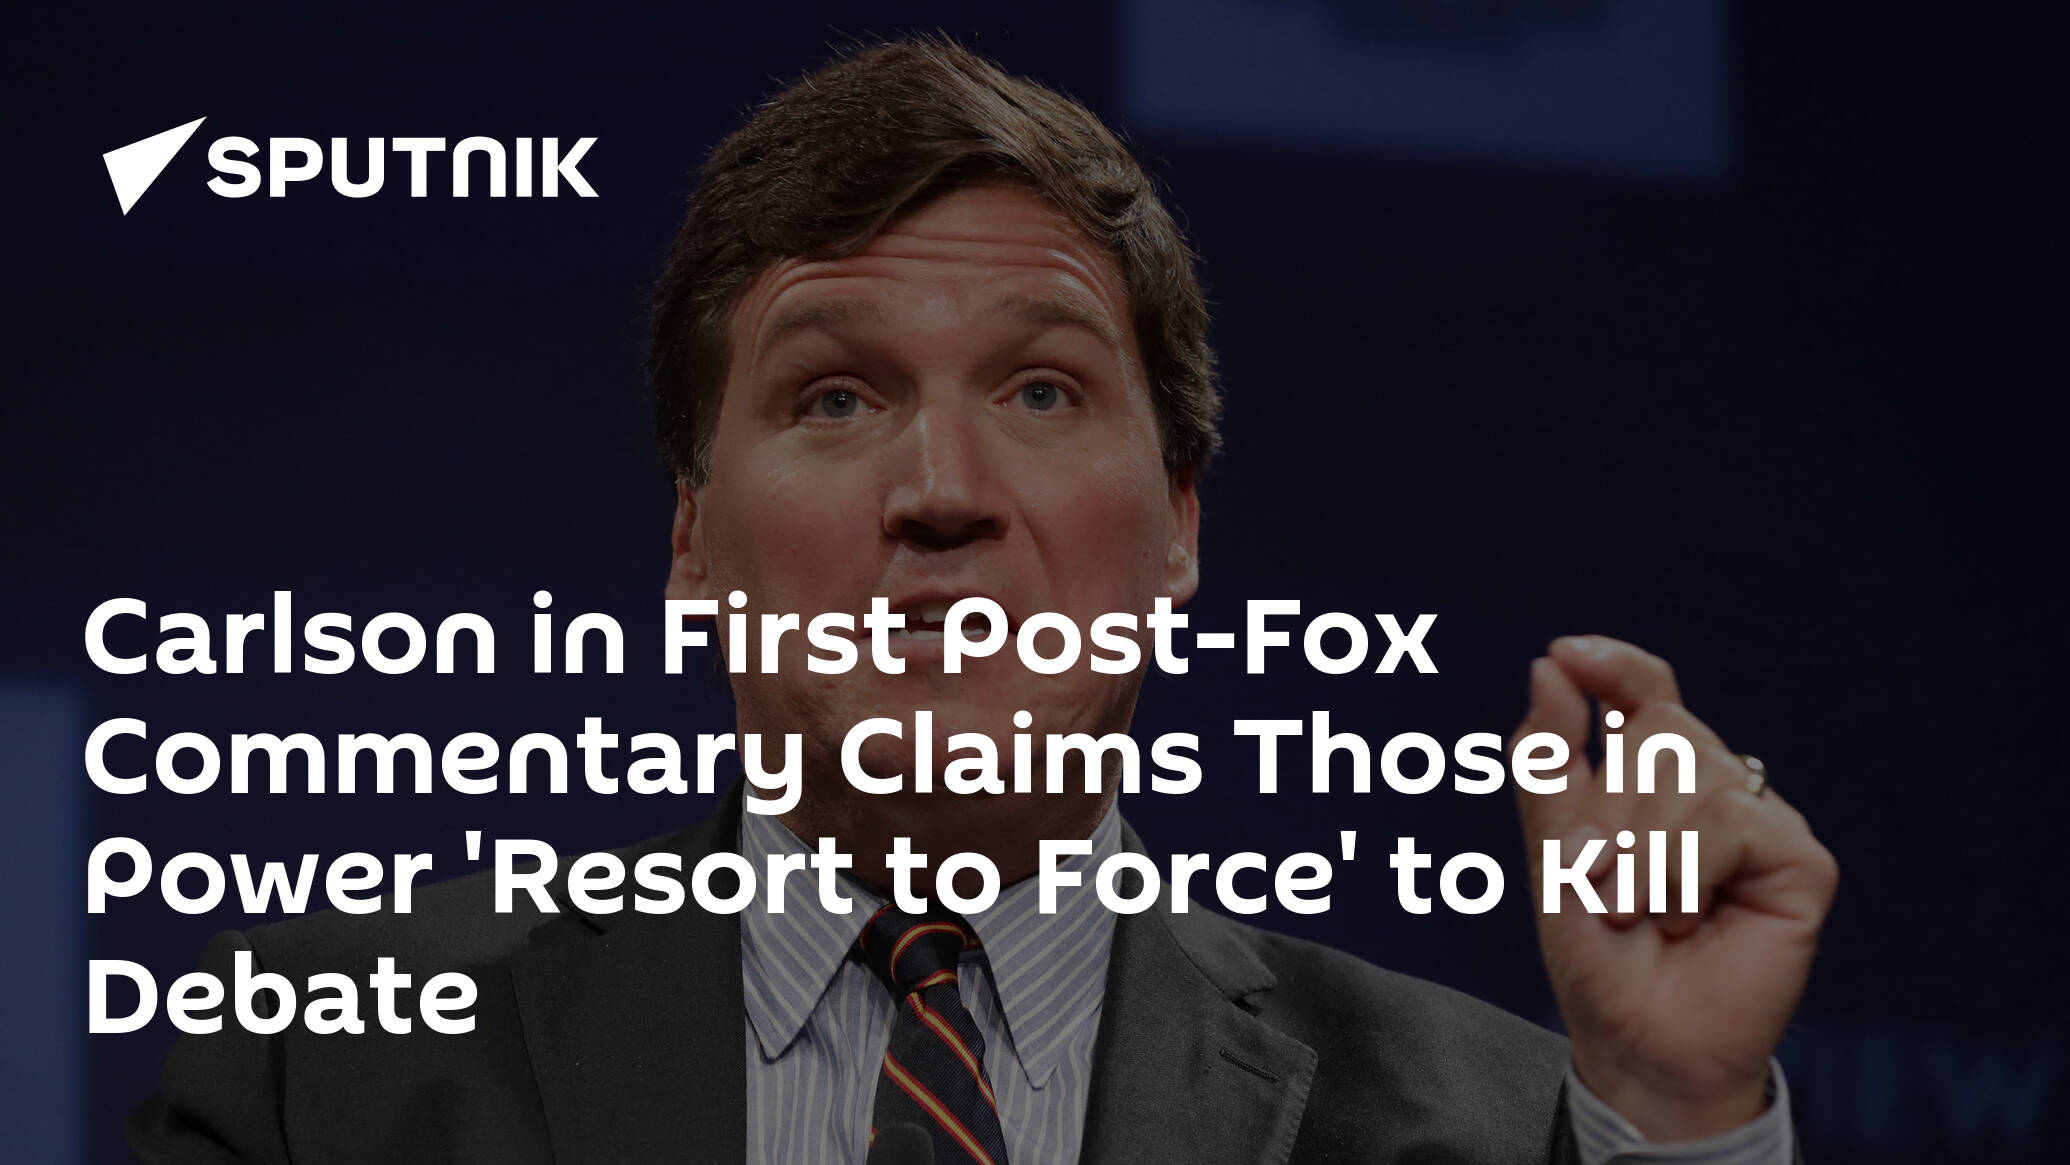 Carlson in First Post-Fox Commentary Claims Those in Power 'Resort to Force' to Kill Debate